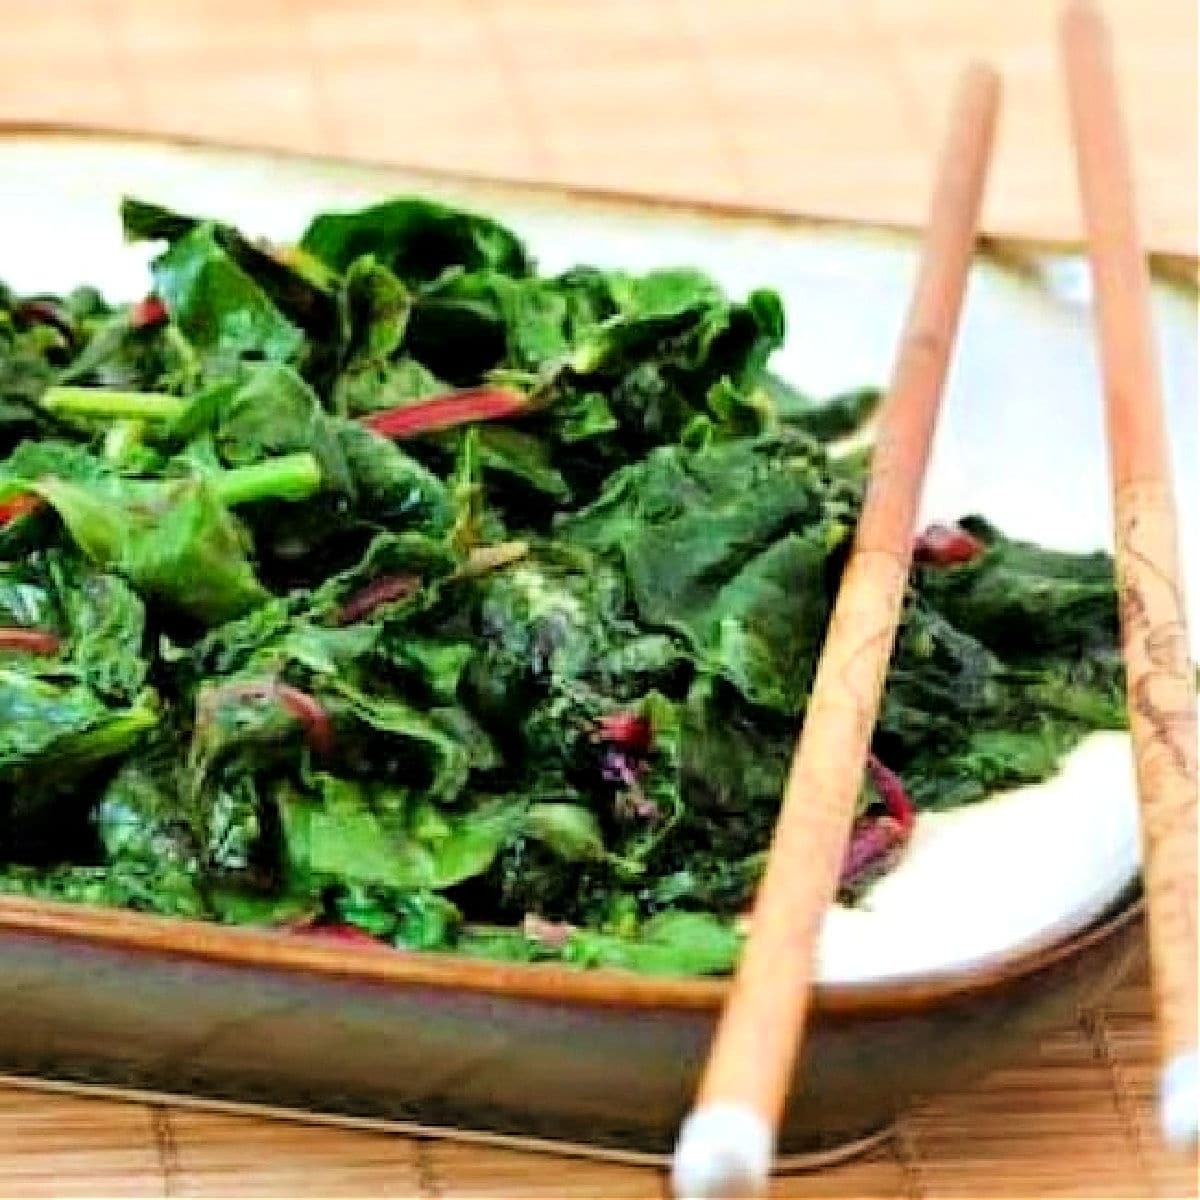 Square image of stir-fried radish greens on serving plate with chopsticks.